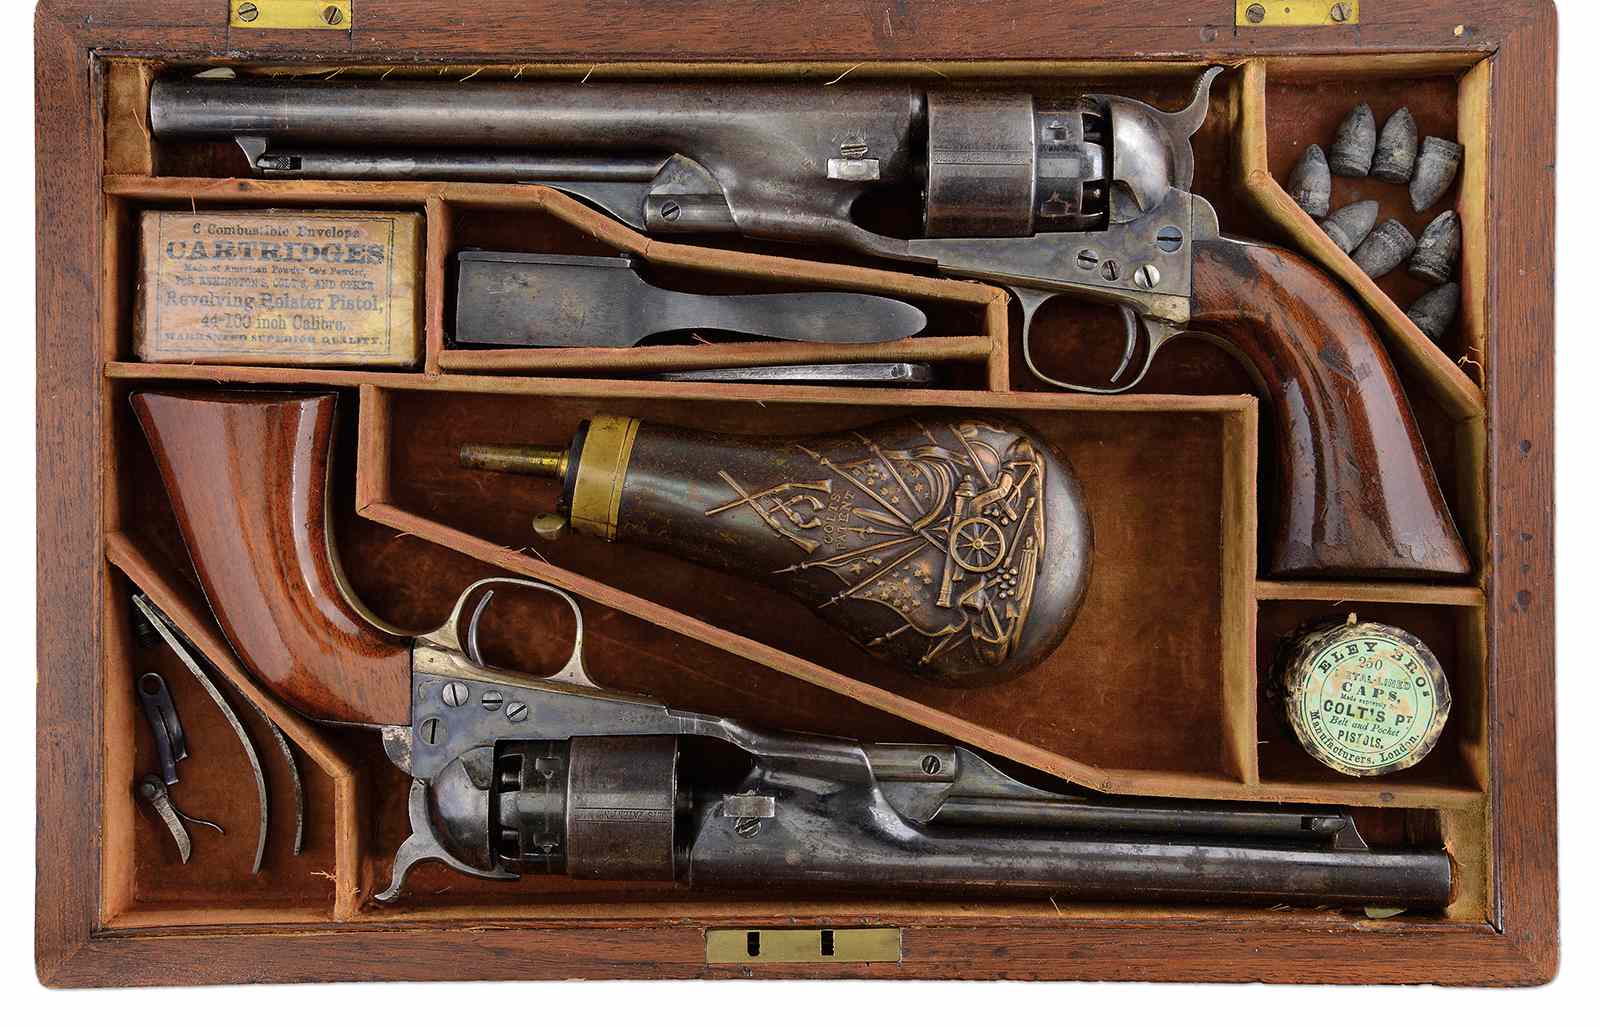 A set of M 1860 Colts presented to James Cameron, Commander of the 79th N.Y. Highlanders. Cameron was the brother of Simeon Cameron, Lincoln’s Secretary of War who also received a set from Col. Colt.